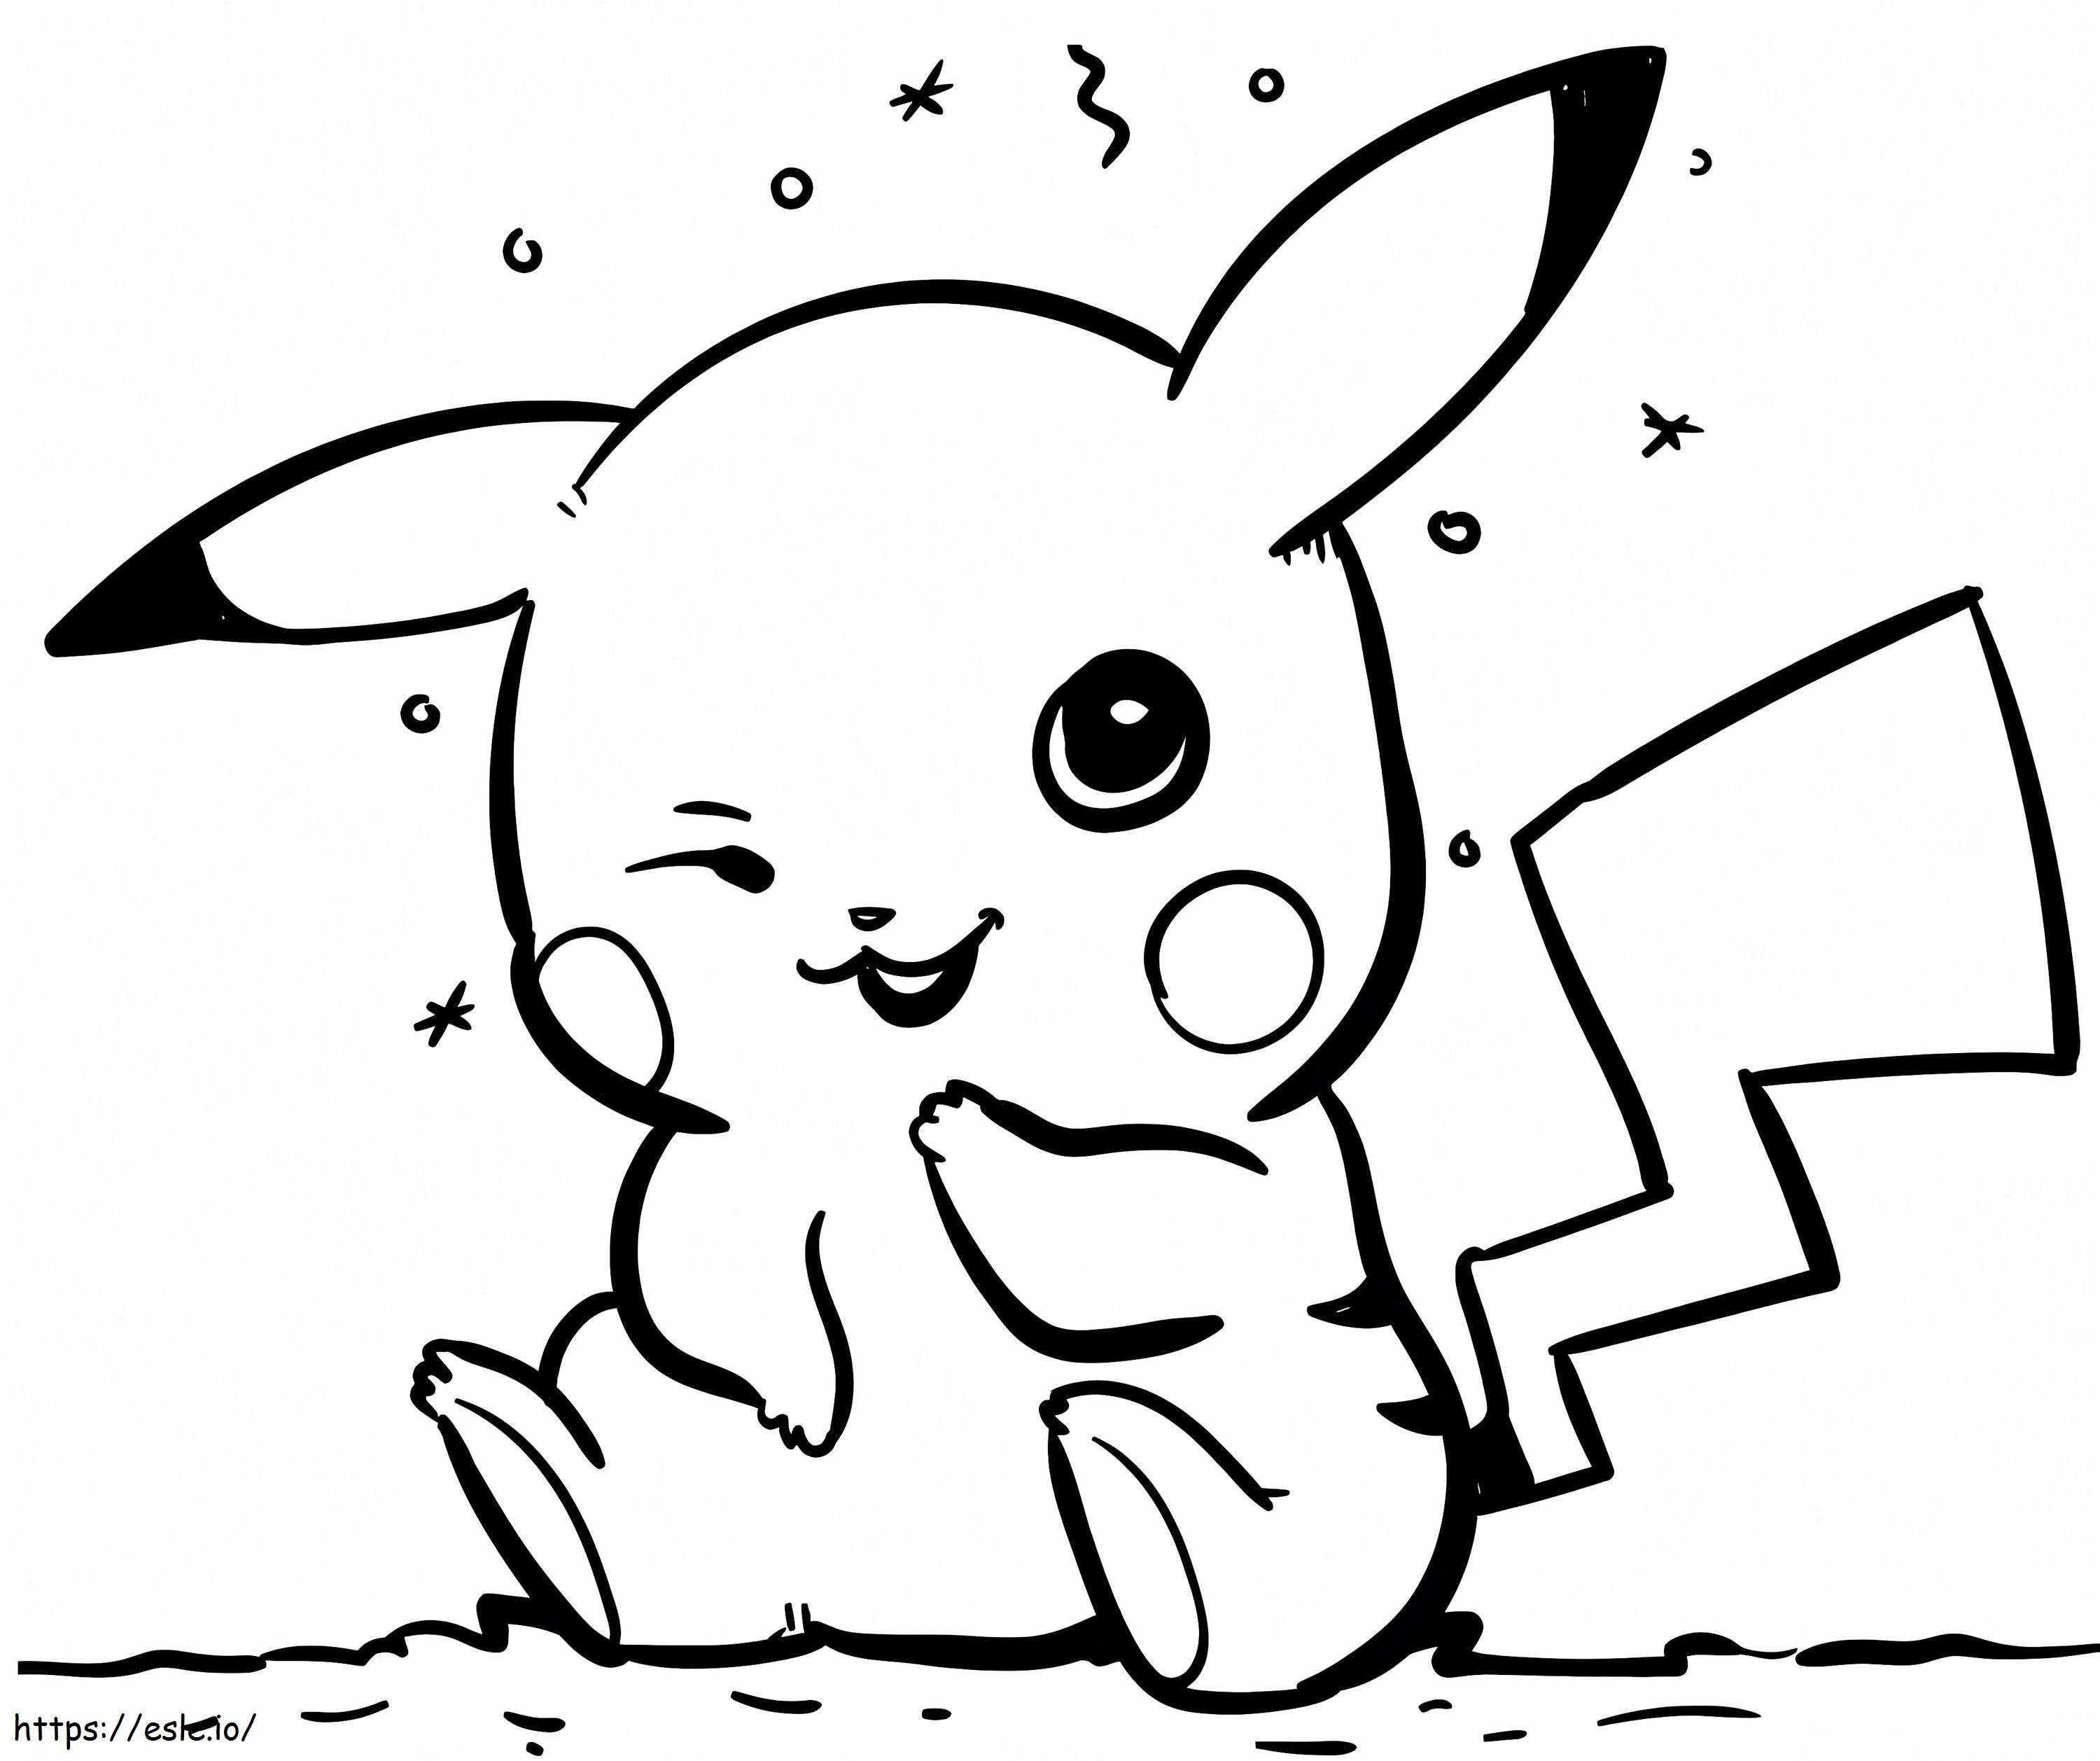 Pikachu Laughing coloring page